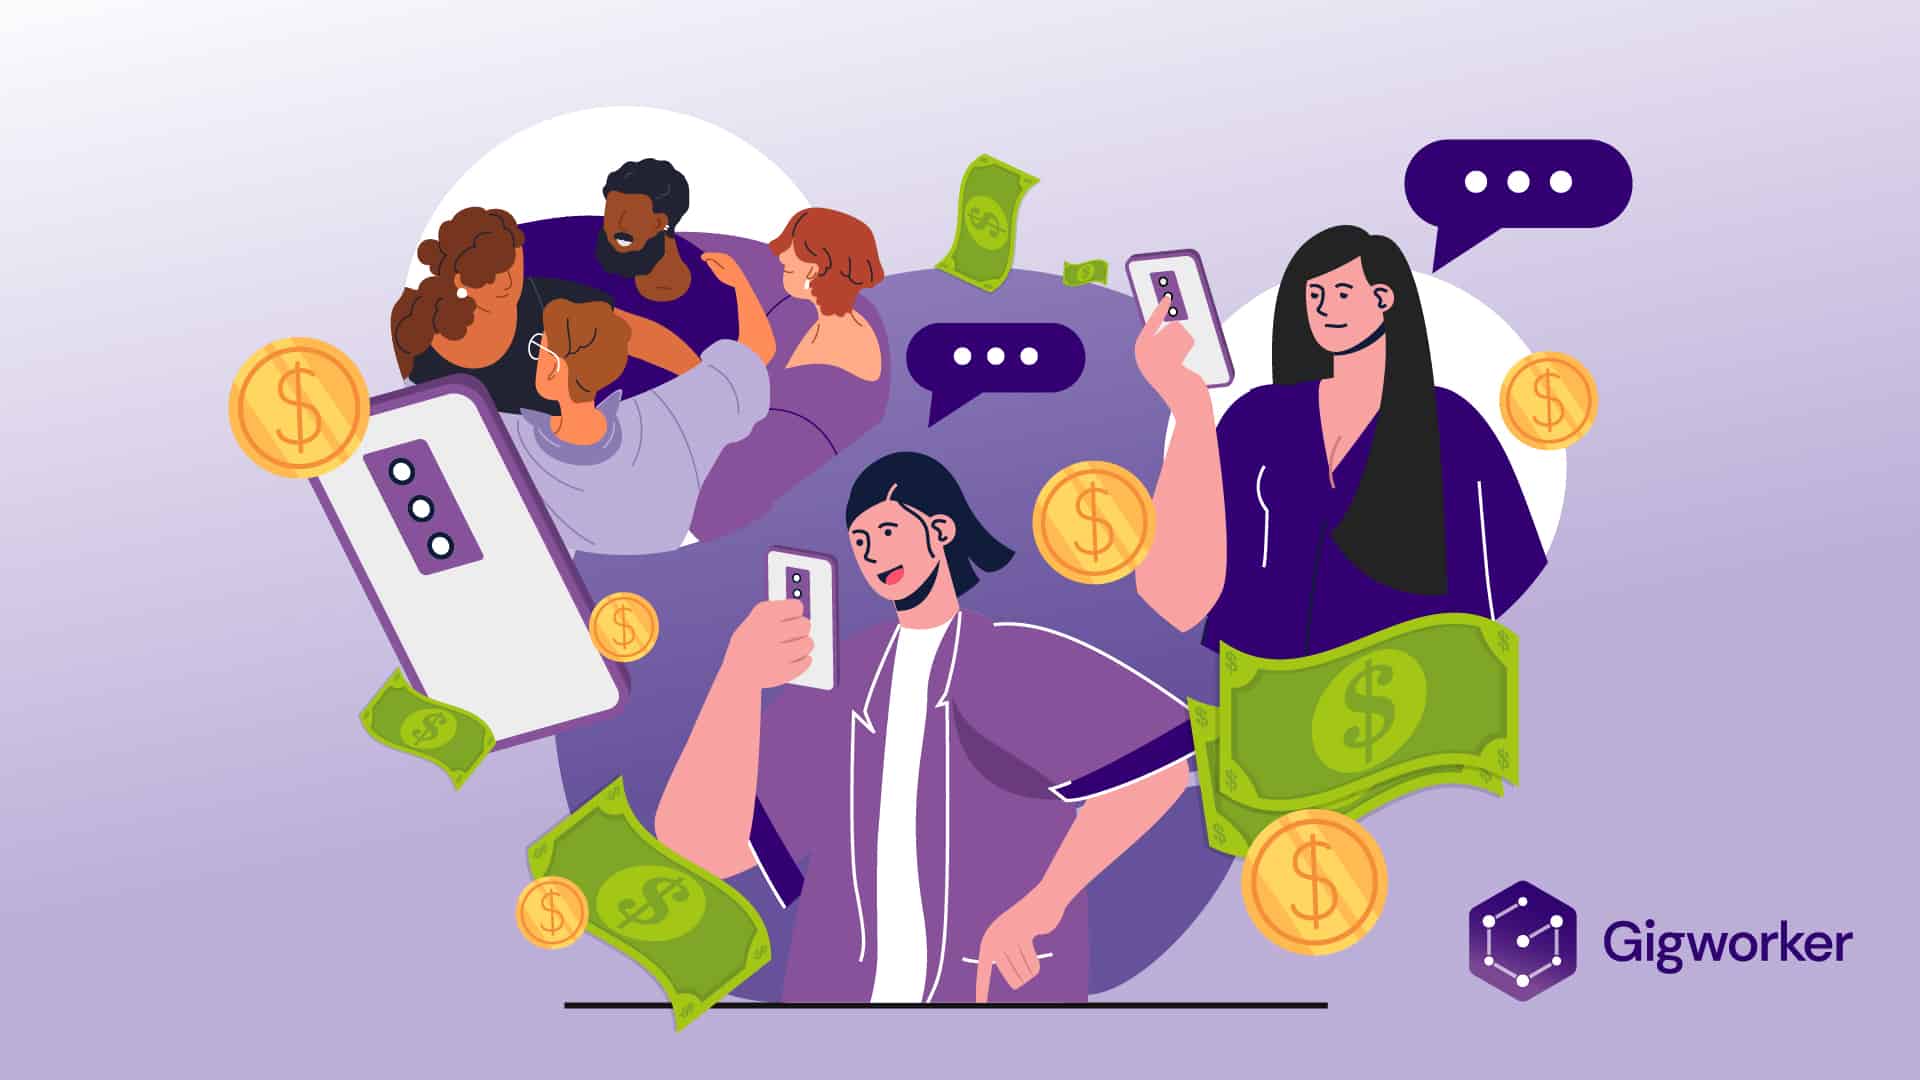 vector graphic showing an illustration of how to get paid to be an online friend